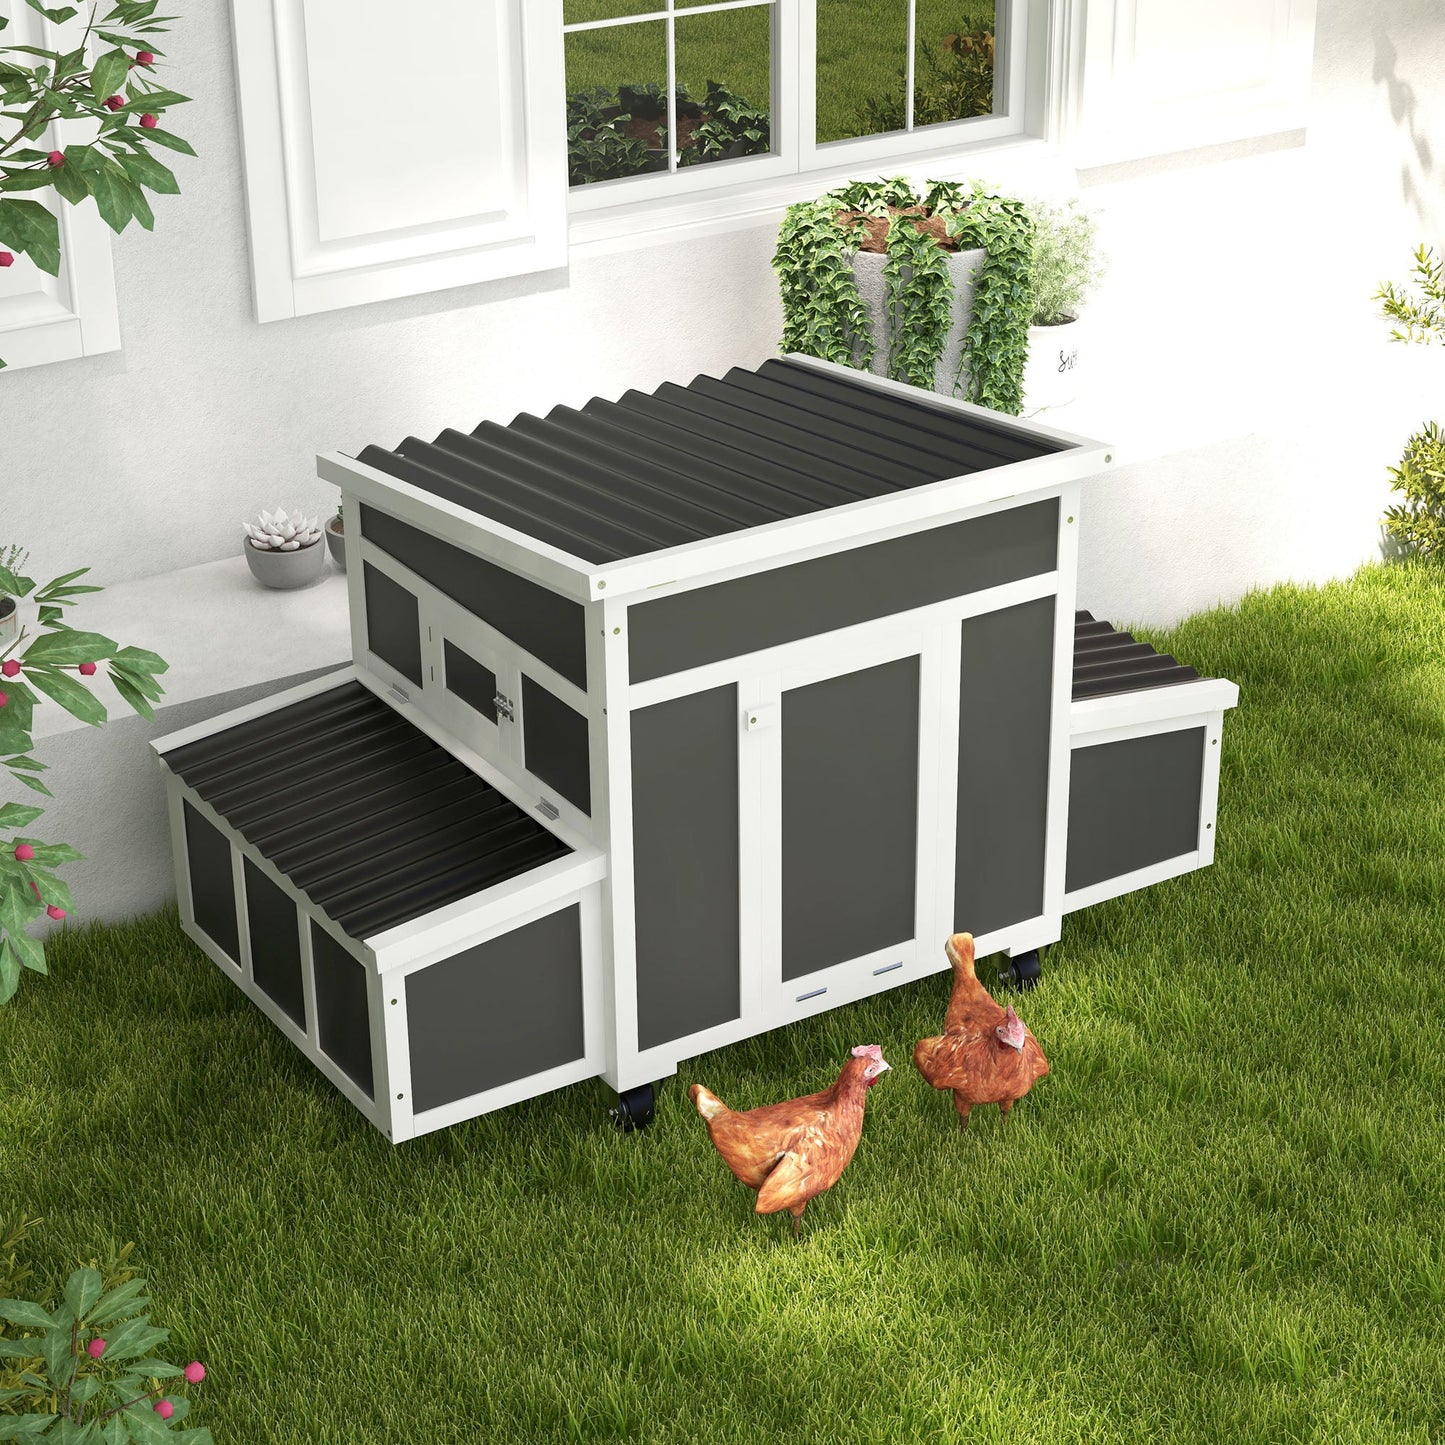 -PawHut Wooden Chicken Coop with Nesting Box, Pull Out Tray, Perches, Ramp & Windows for 6 Chickens, Hen House for Outdoor Backyard, Dark Gray - Outdoor Style Company